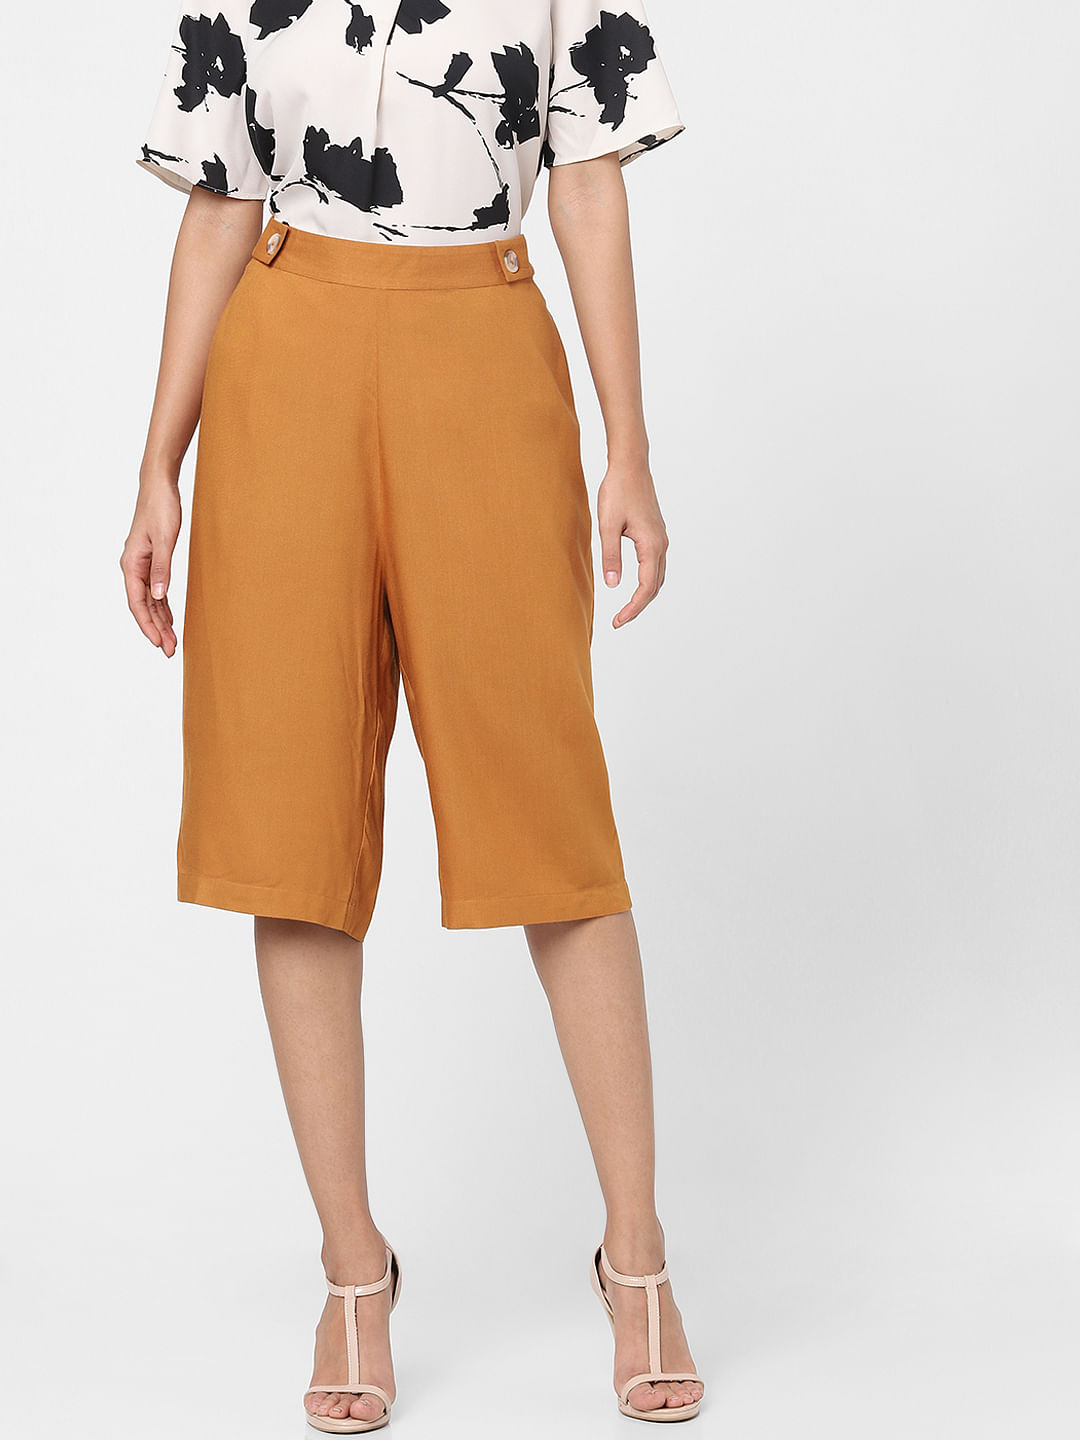 Buy Brown Plain Coloured Trousers For Women Online in India  VeroModa